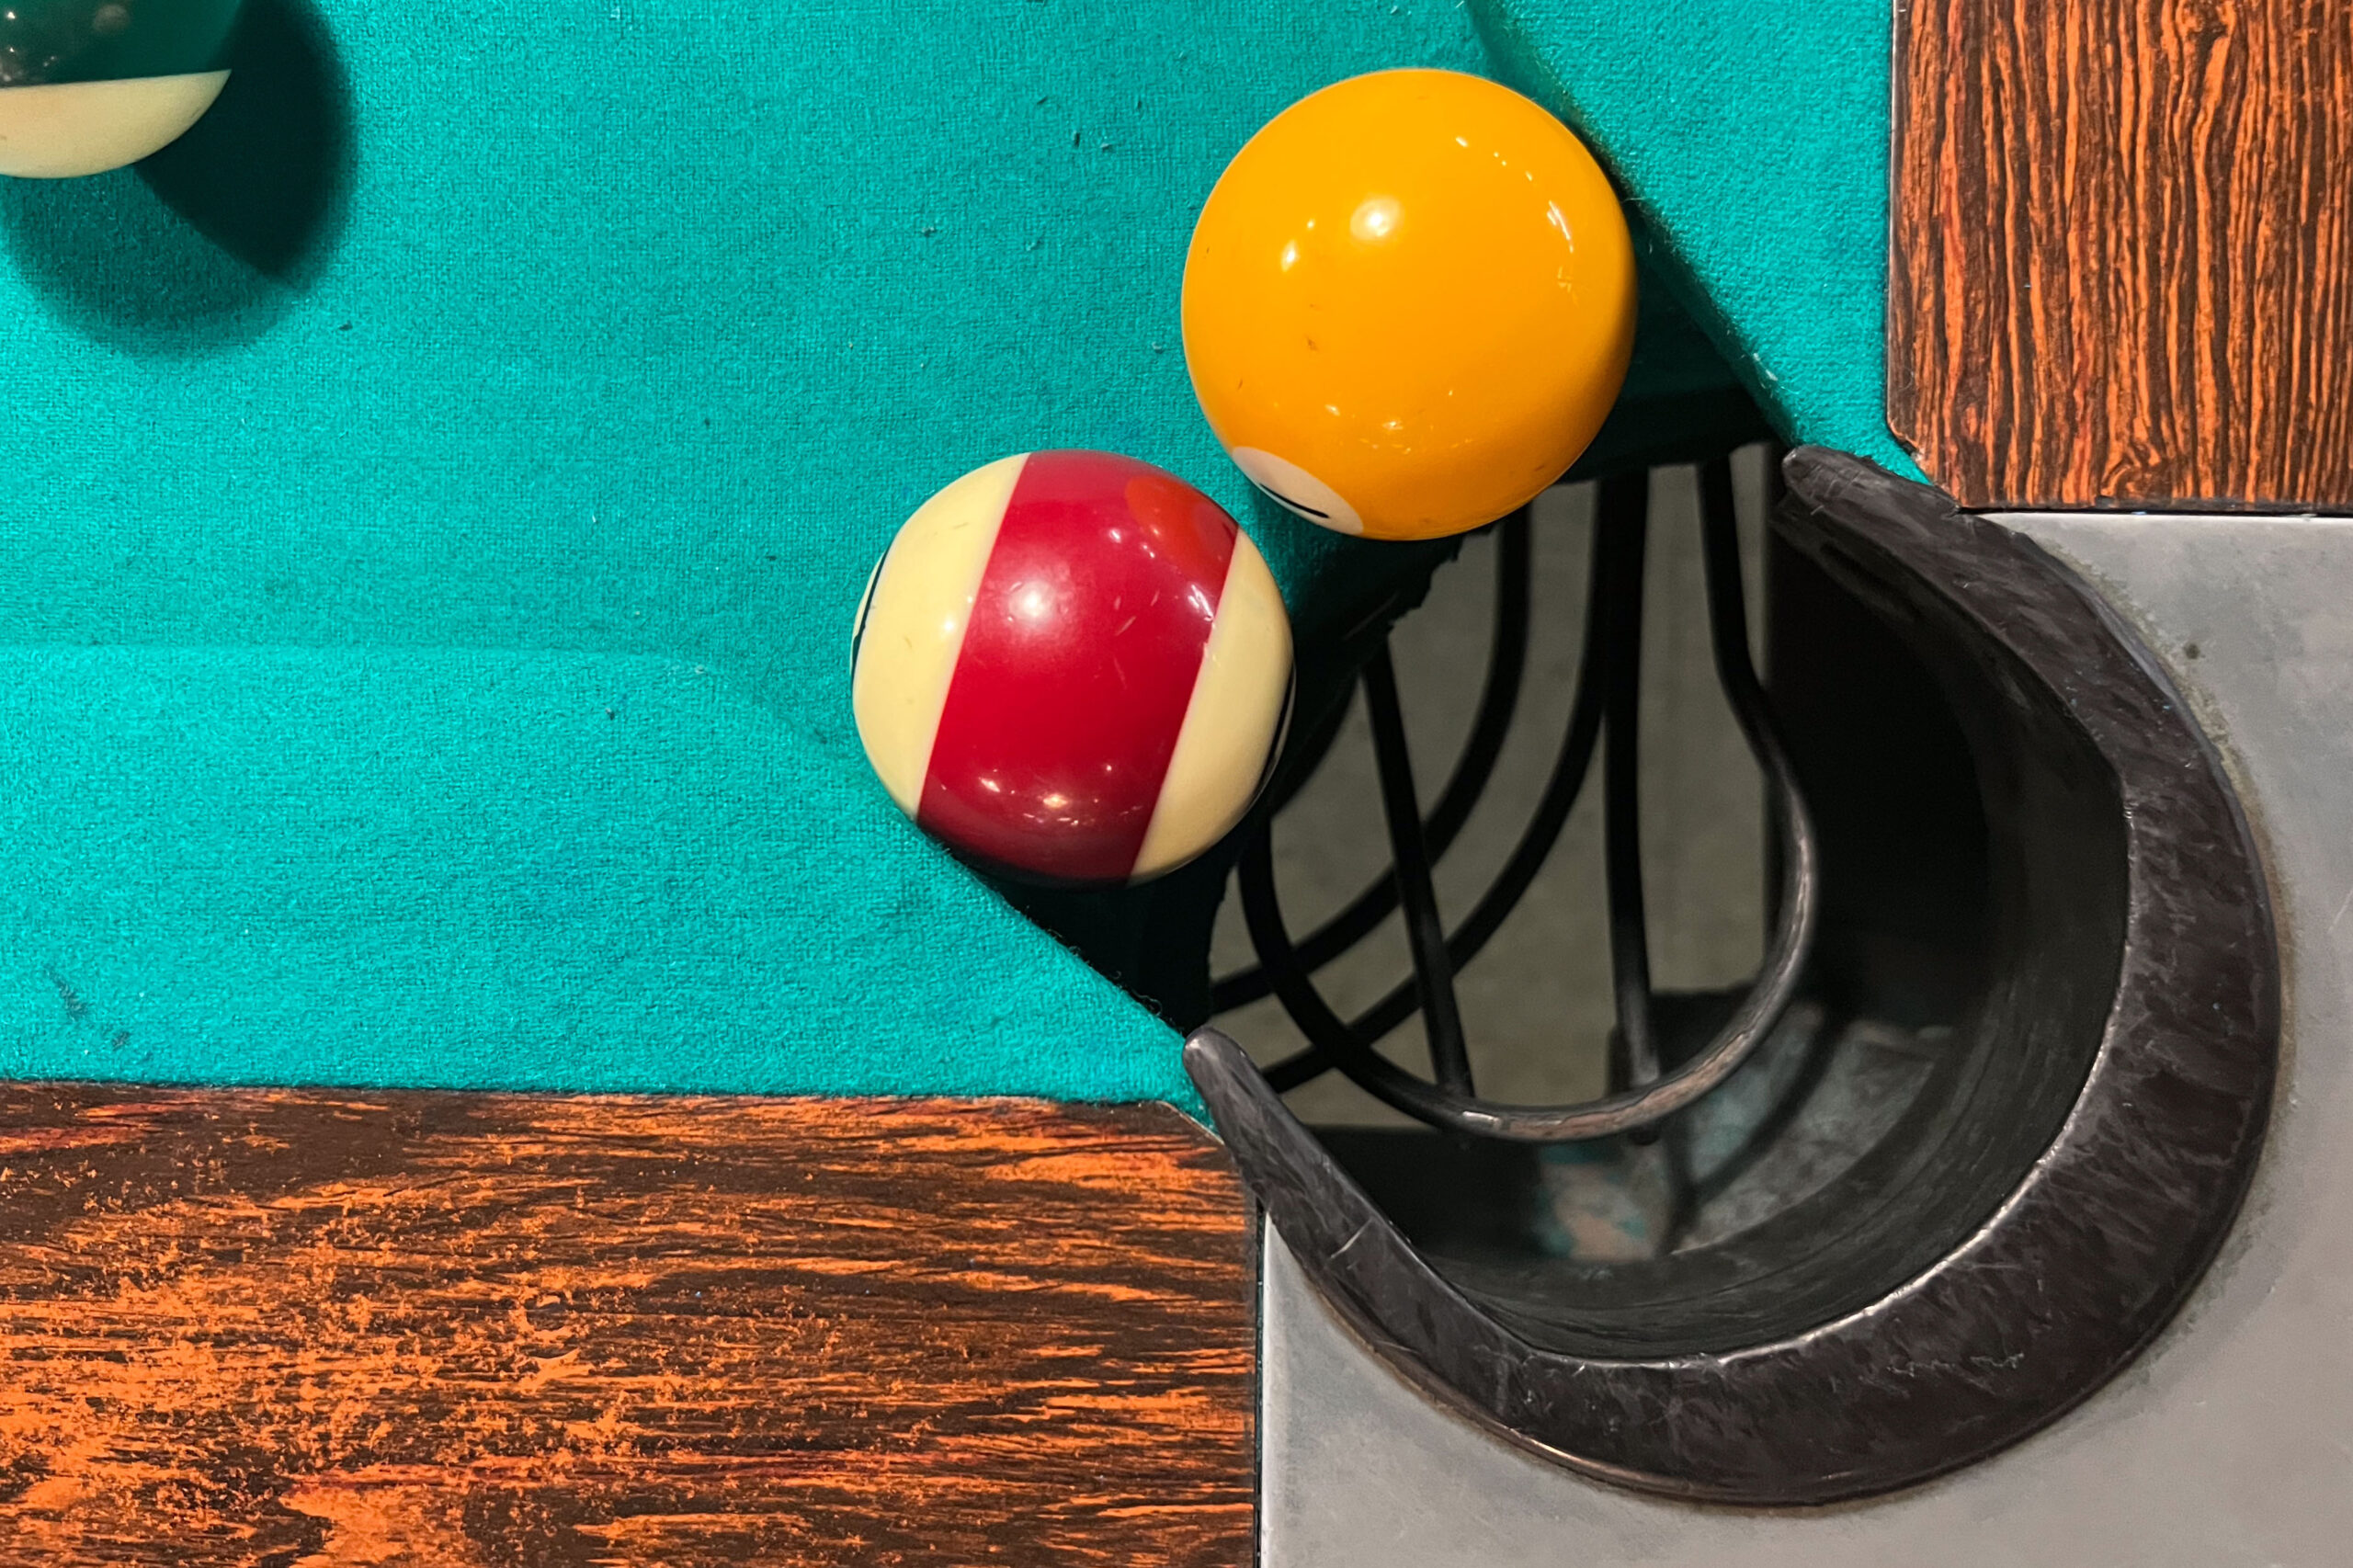 Billiard table with two balls inside the jaws of a corner pocket, showing there is ample room for both, with plenty of additional space between them.